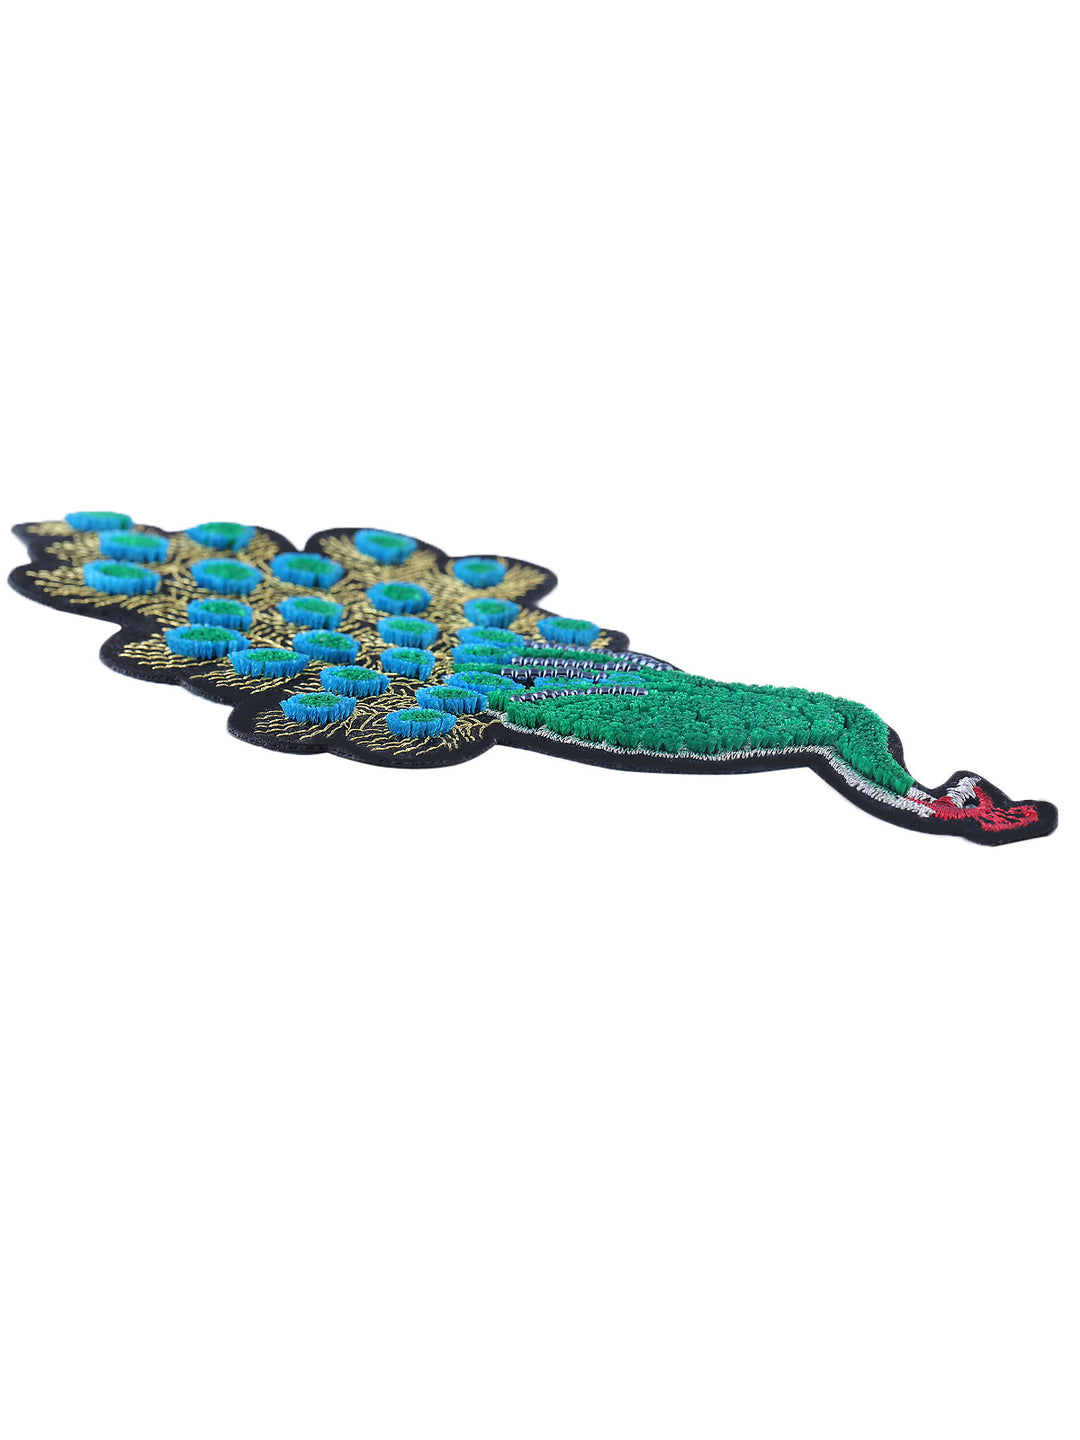 Gorgeous Embroidered Sew On Beaded Peacock Bird Patch